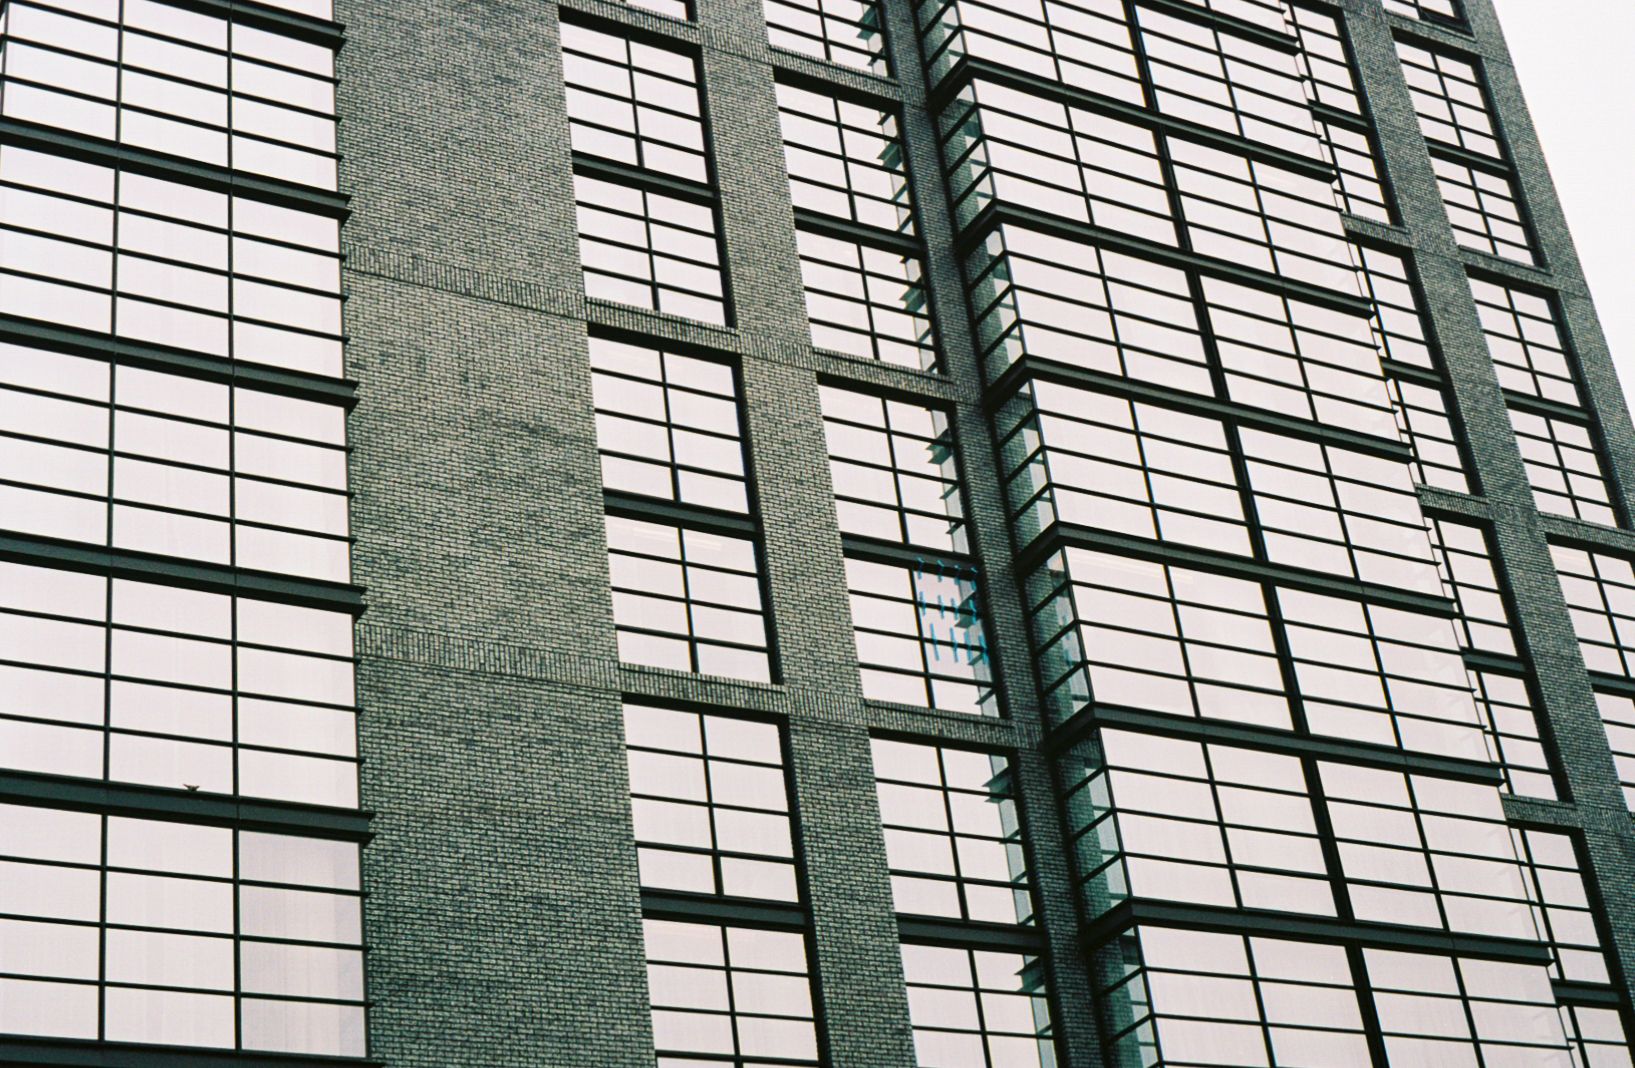 A 35mm film photograph of AC Hotel in Washington, DC. Its architecture is simple: black brick and glass.